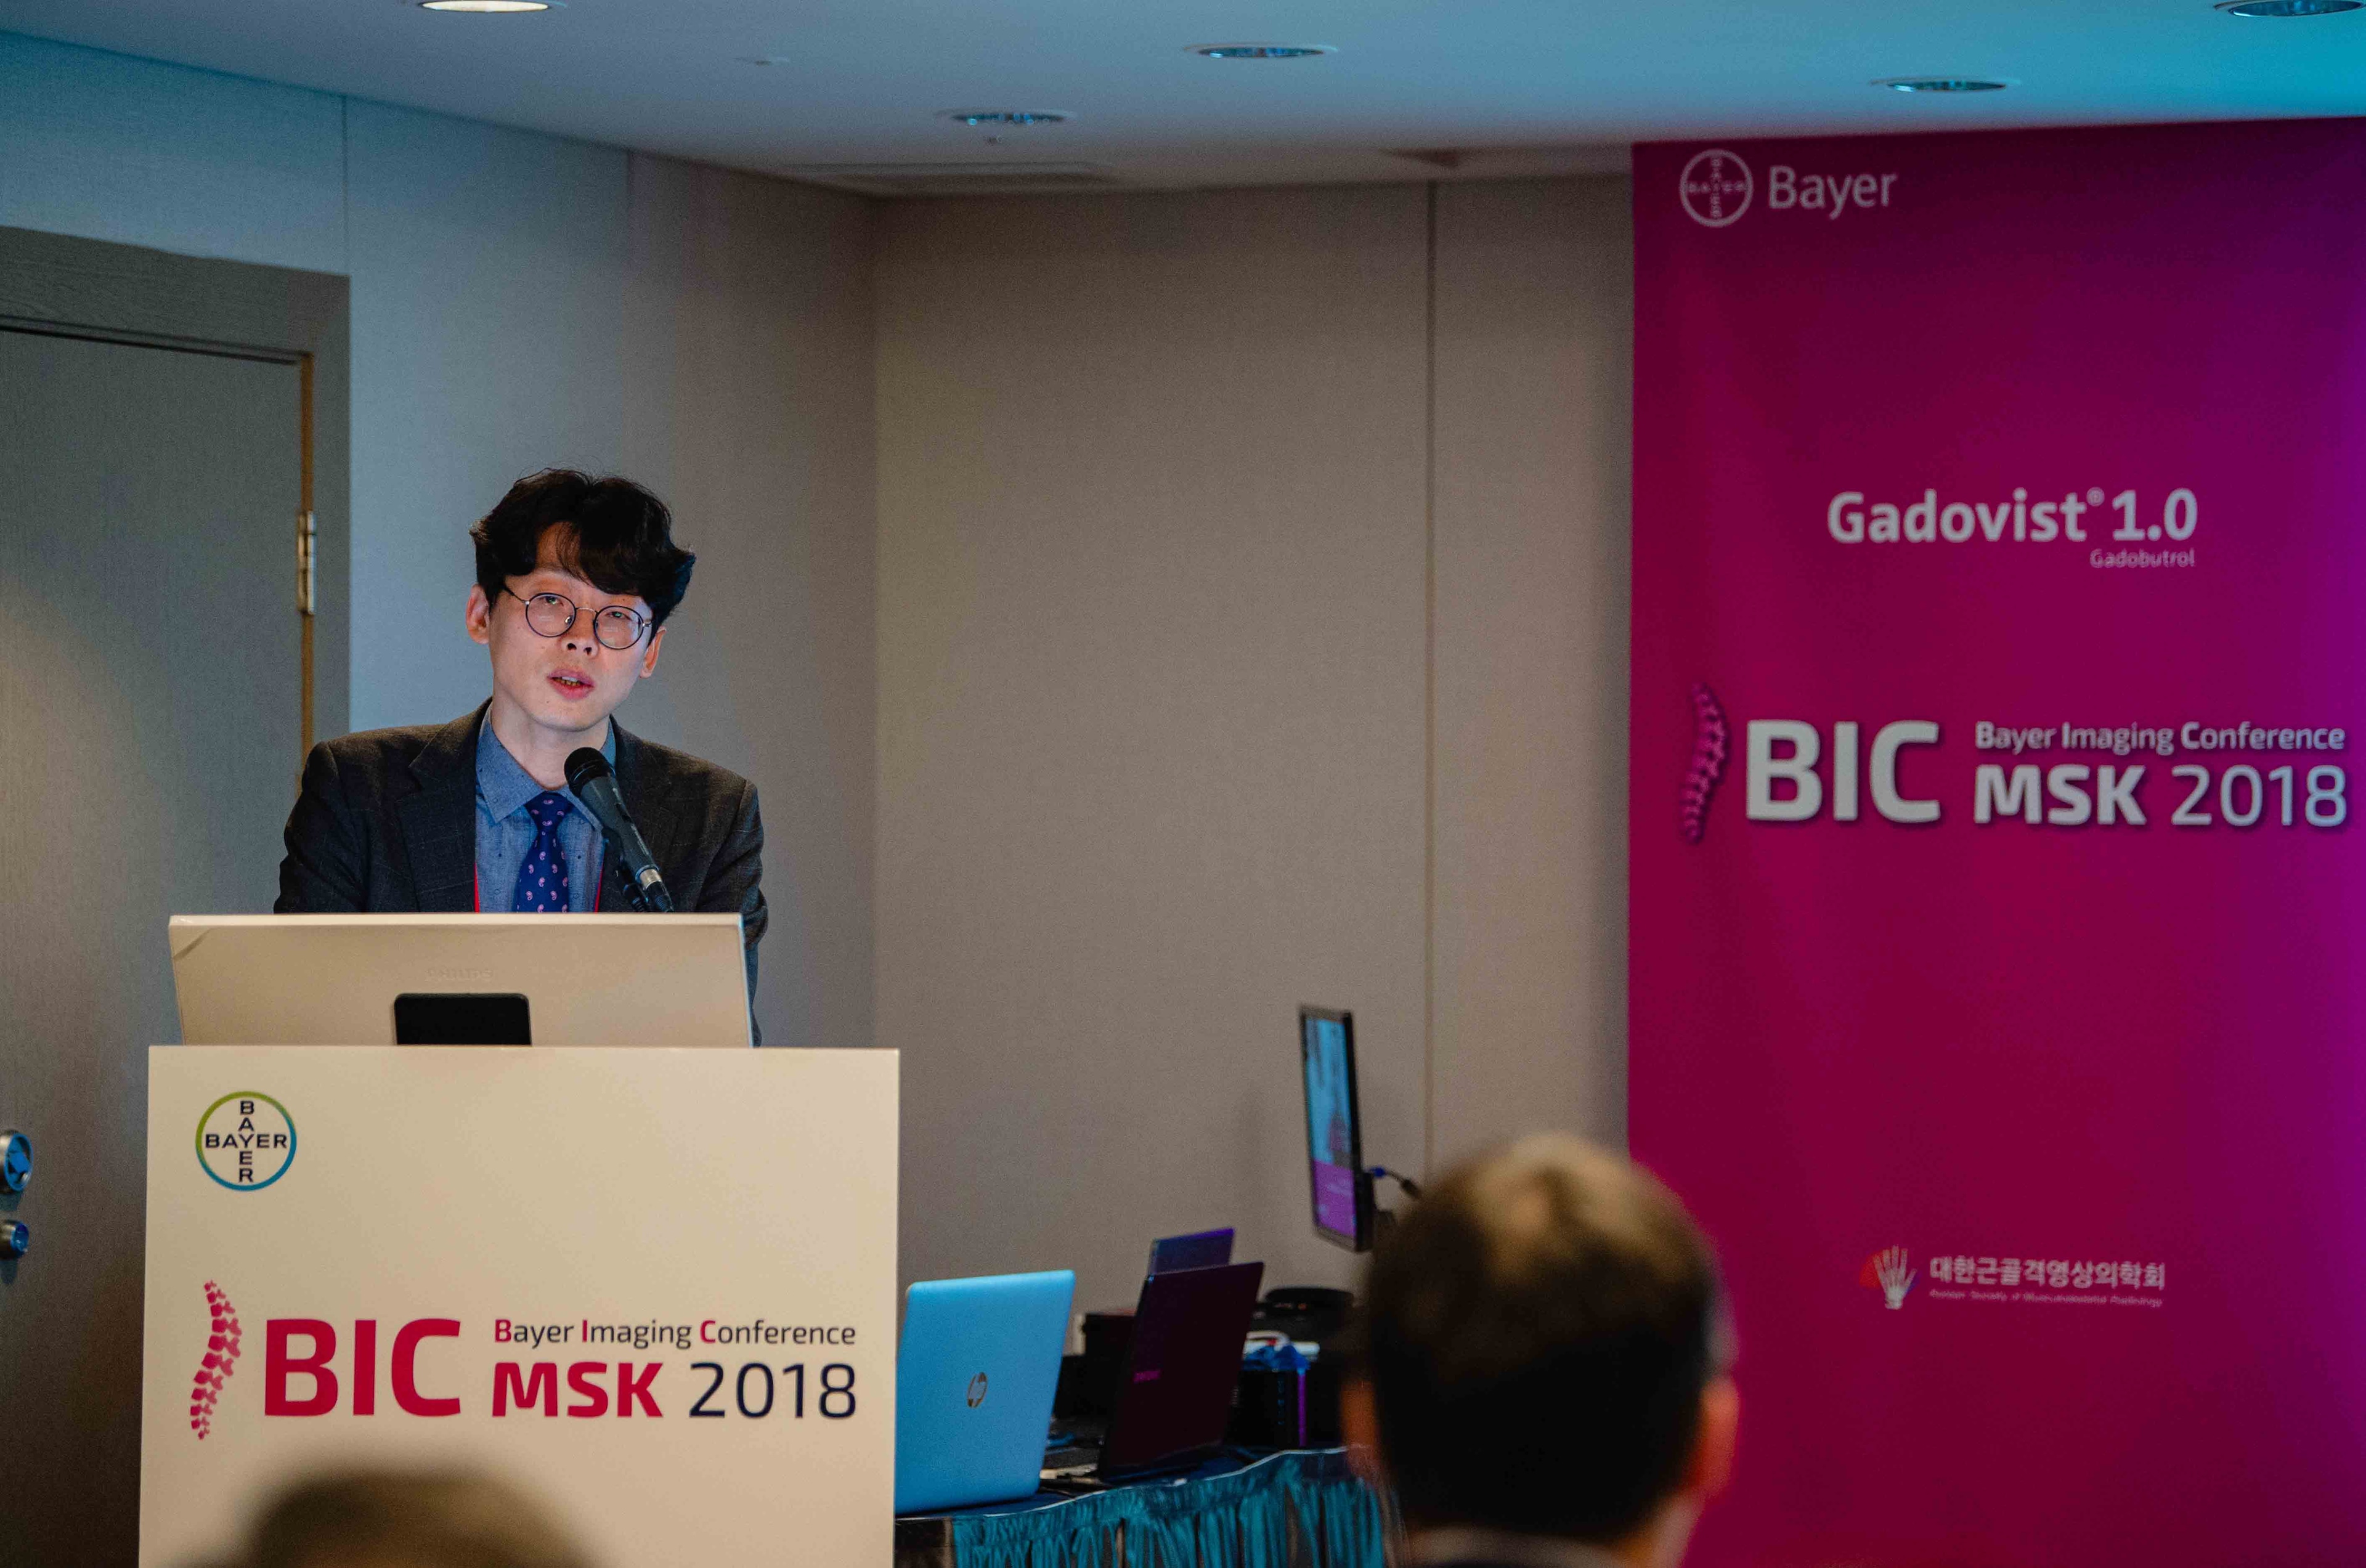 Bic MSK 2018 preview image